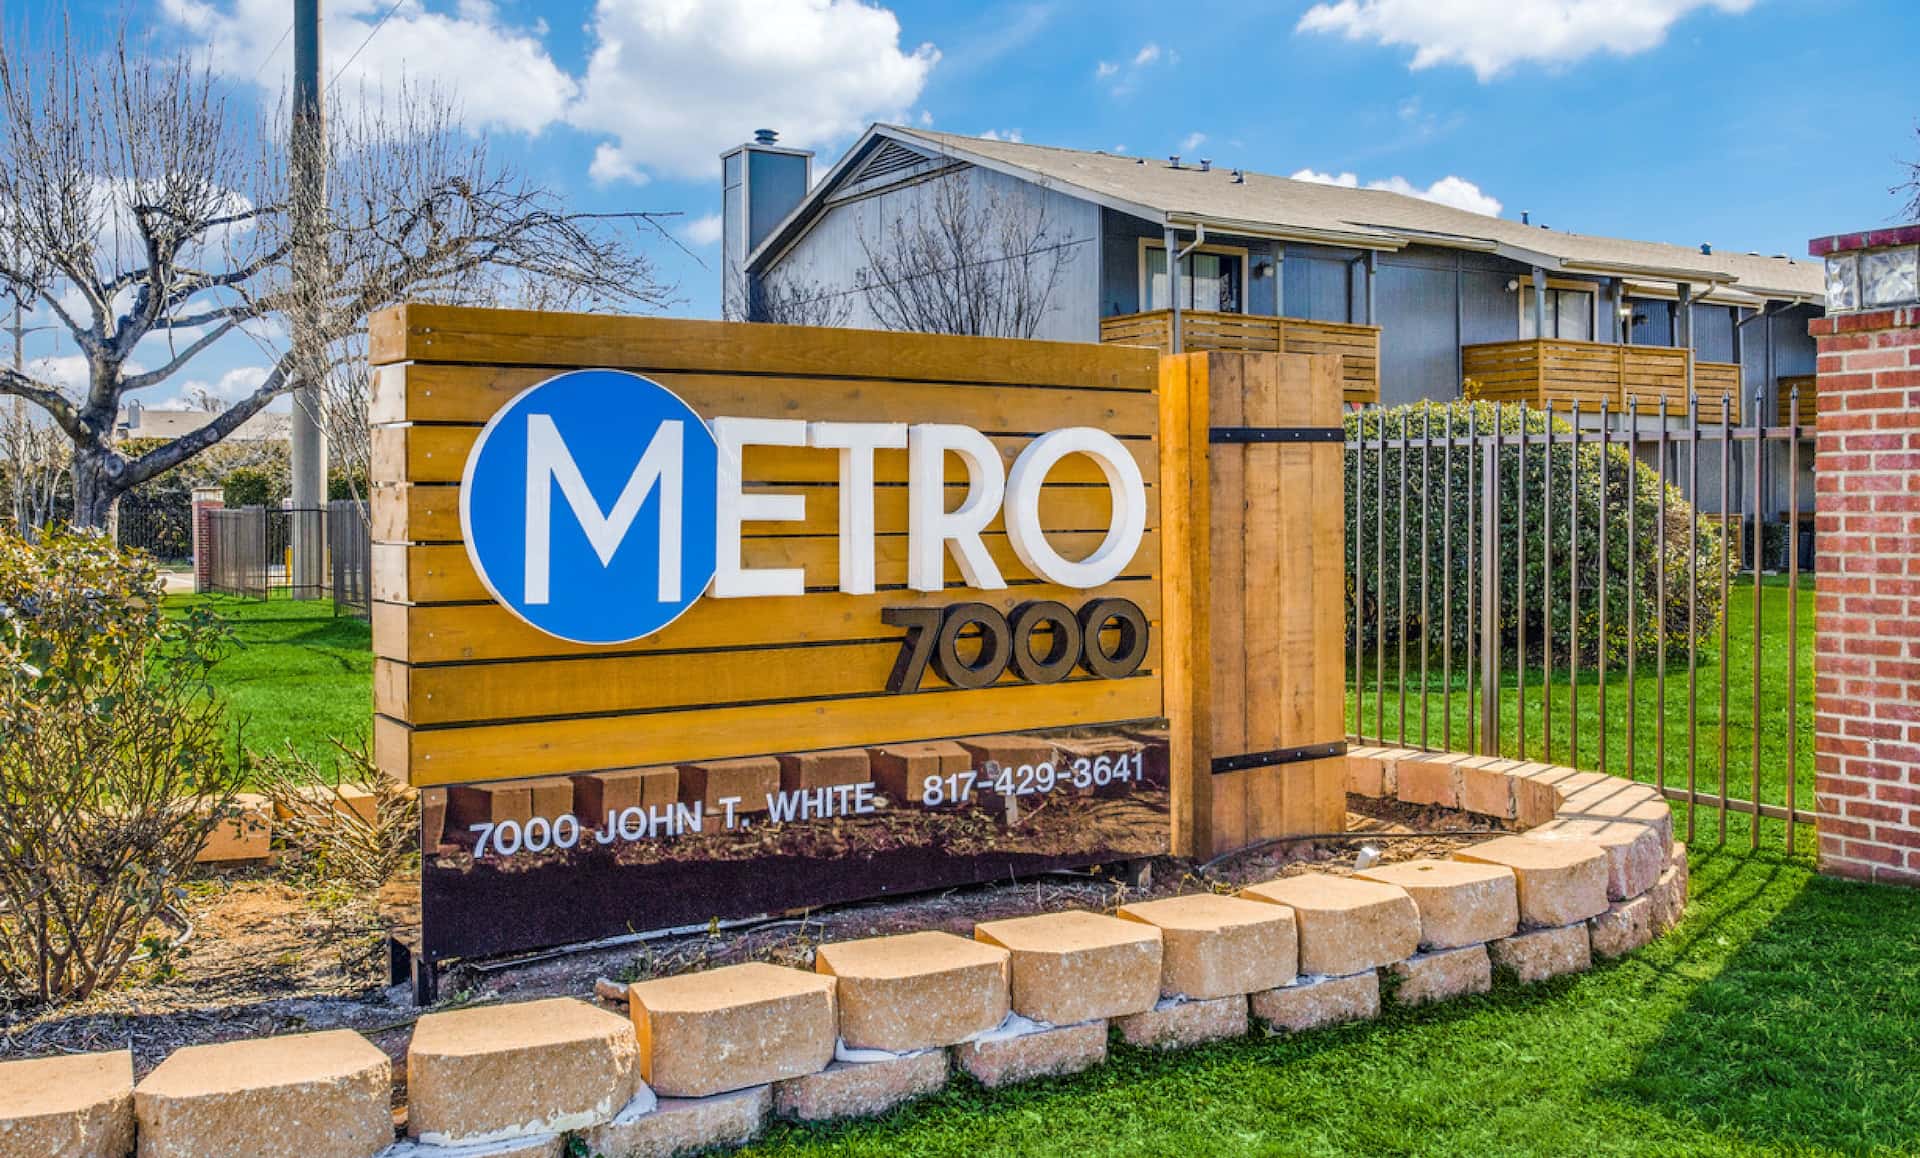 Metro 7000 sign in front of apartment complex.